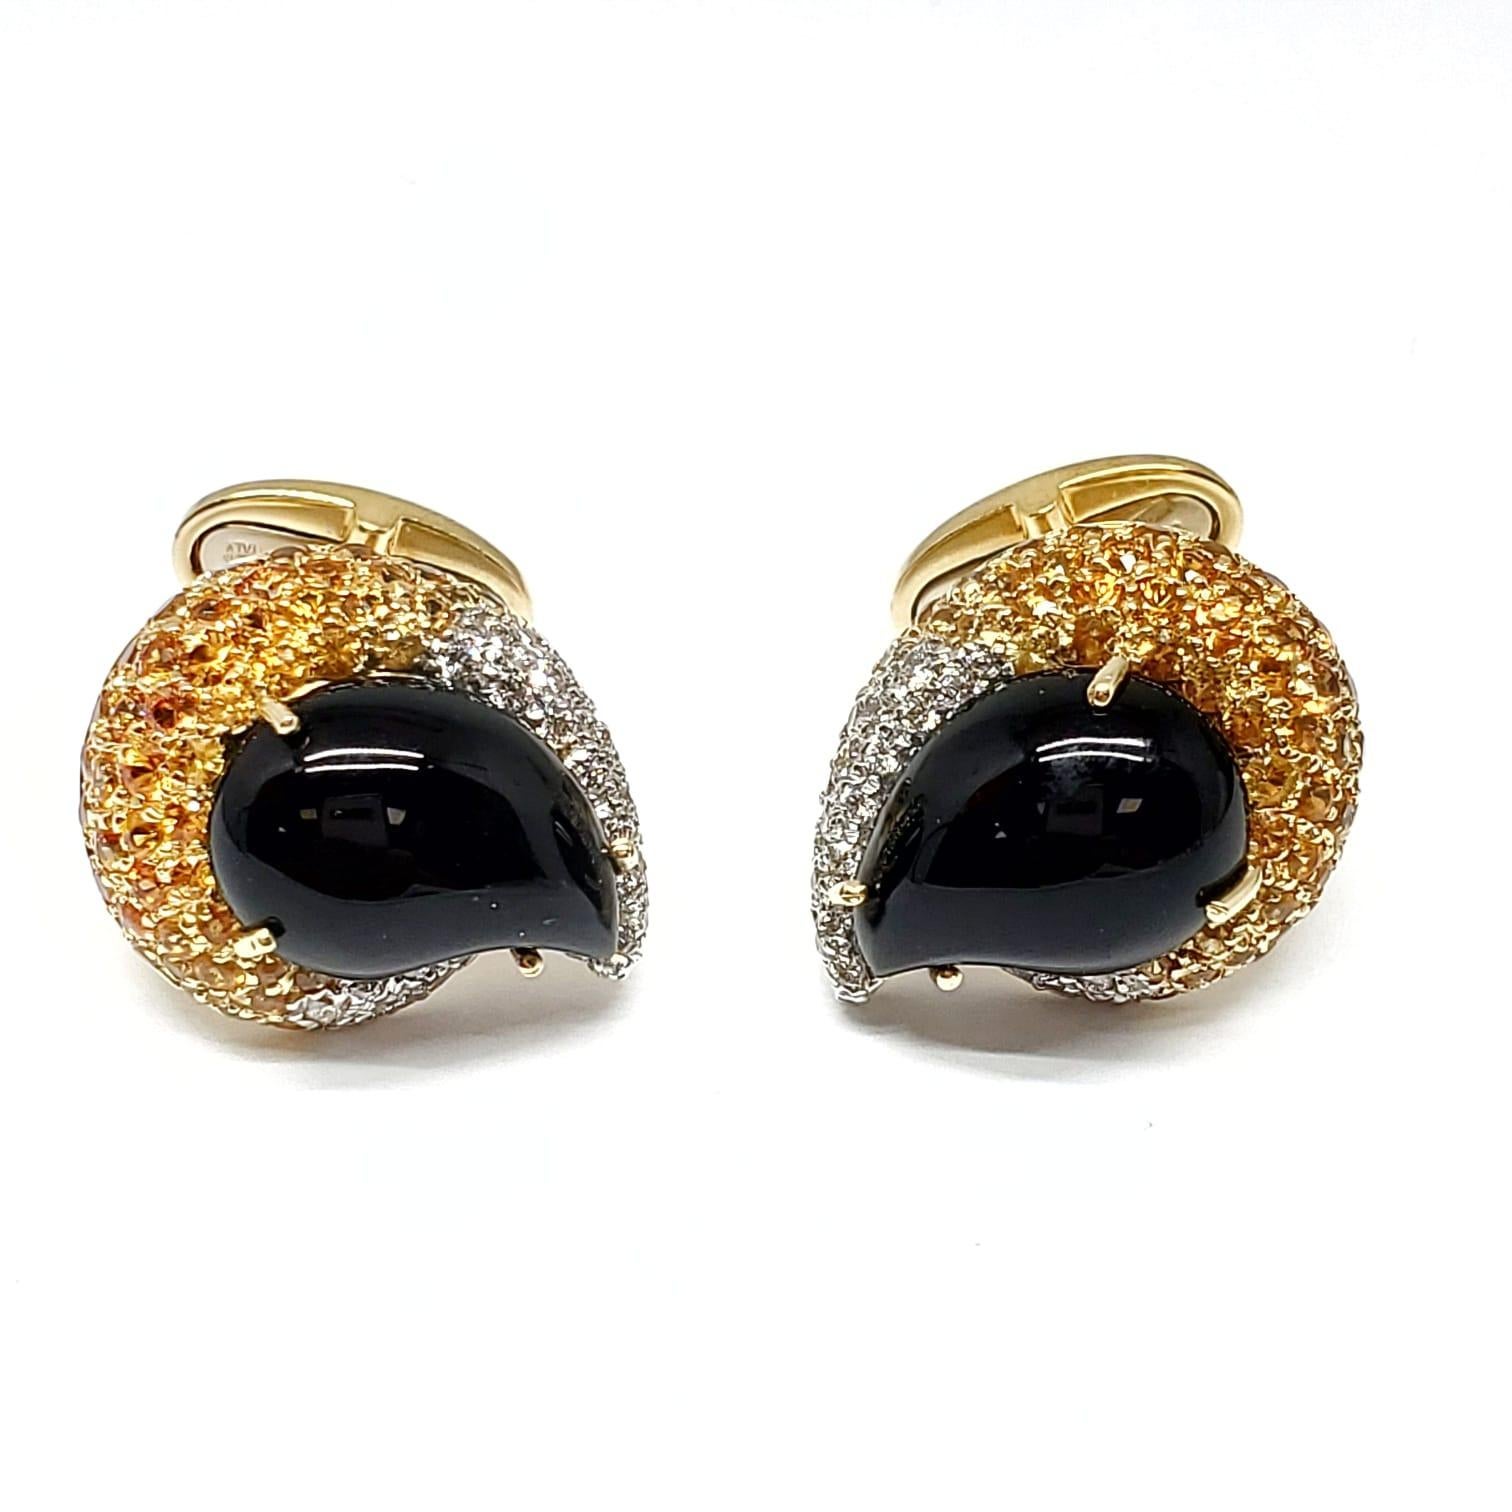 Andreoli Onyx Yellow Sapphire 18 Karat Yellow Gold Mens Cufflinks

This Andreoli cufflinks features:

- 0.75 carat Diamonds
- 3.11 carat Yellow Sapphire
- Onyx Center Stones
- 19.60 grams 18 Karat Yellow Gold
-One Of A Kind 
- Made in Italy
